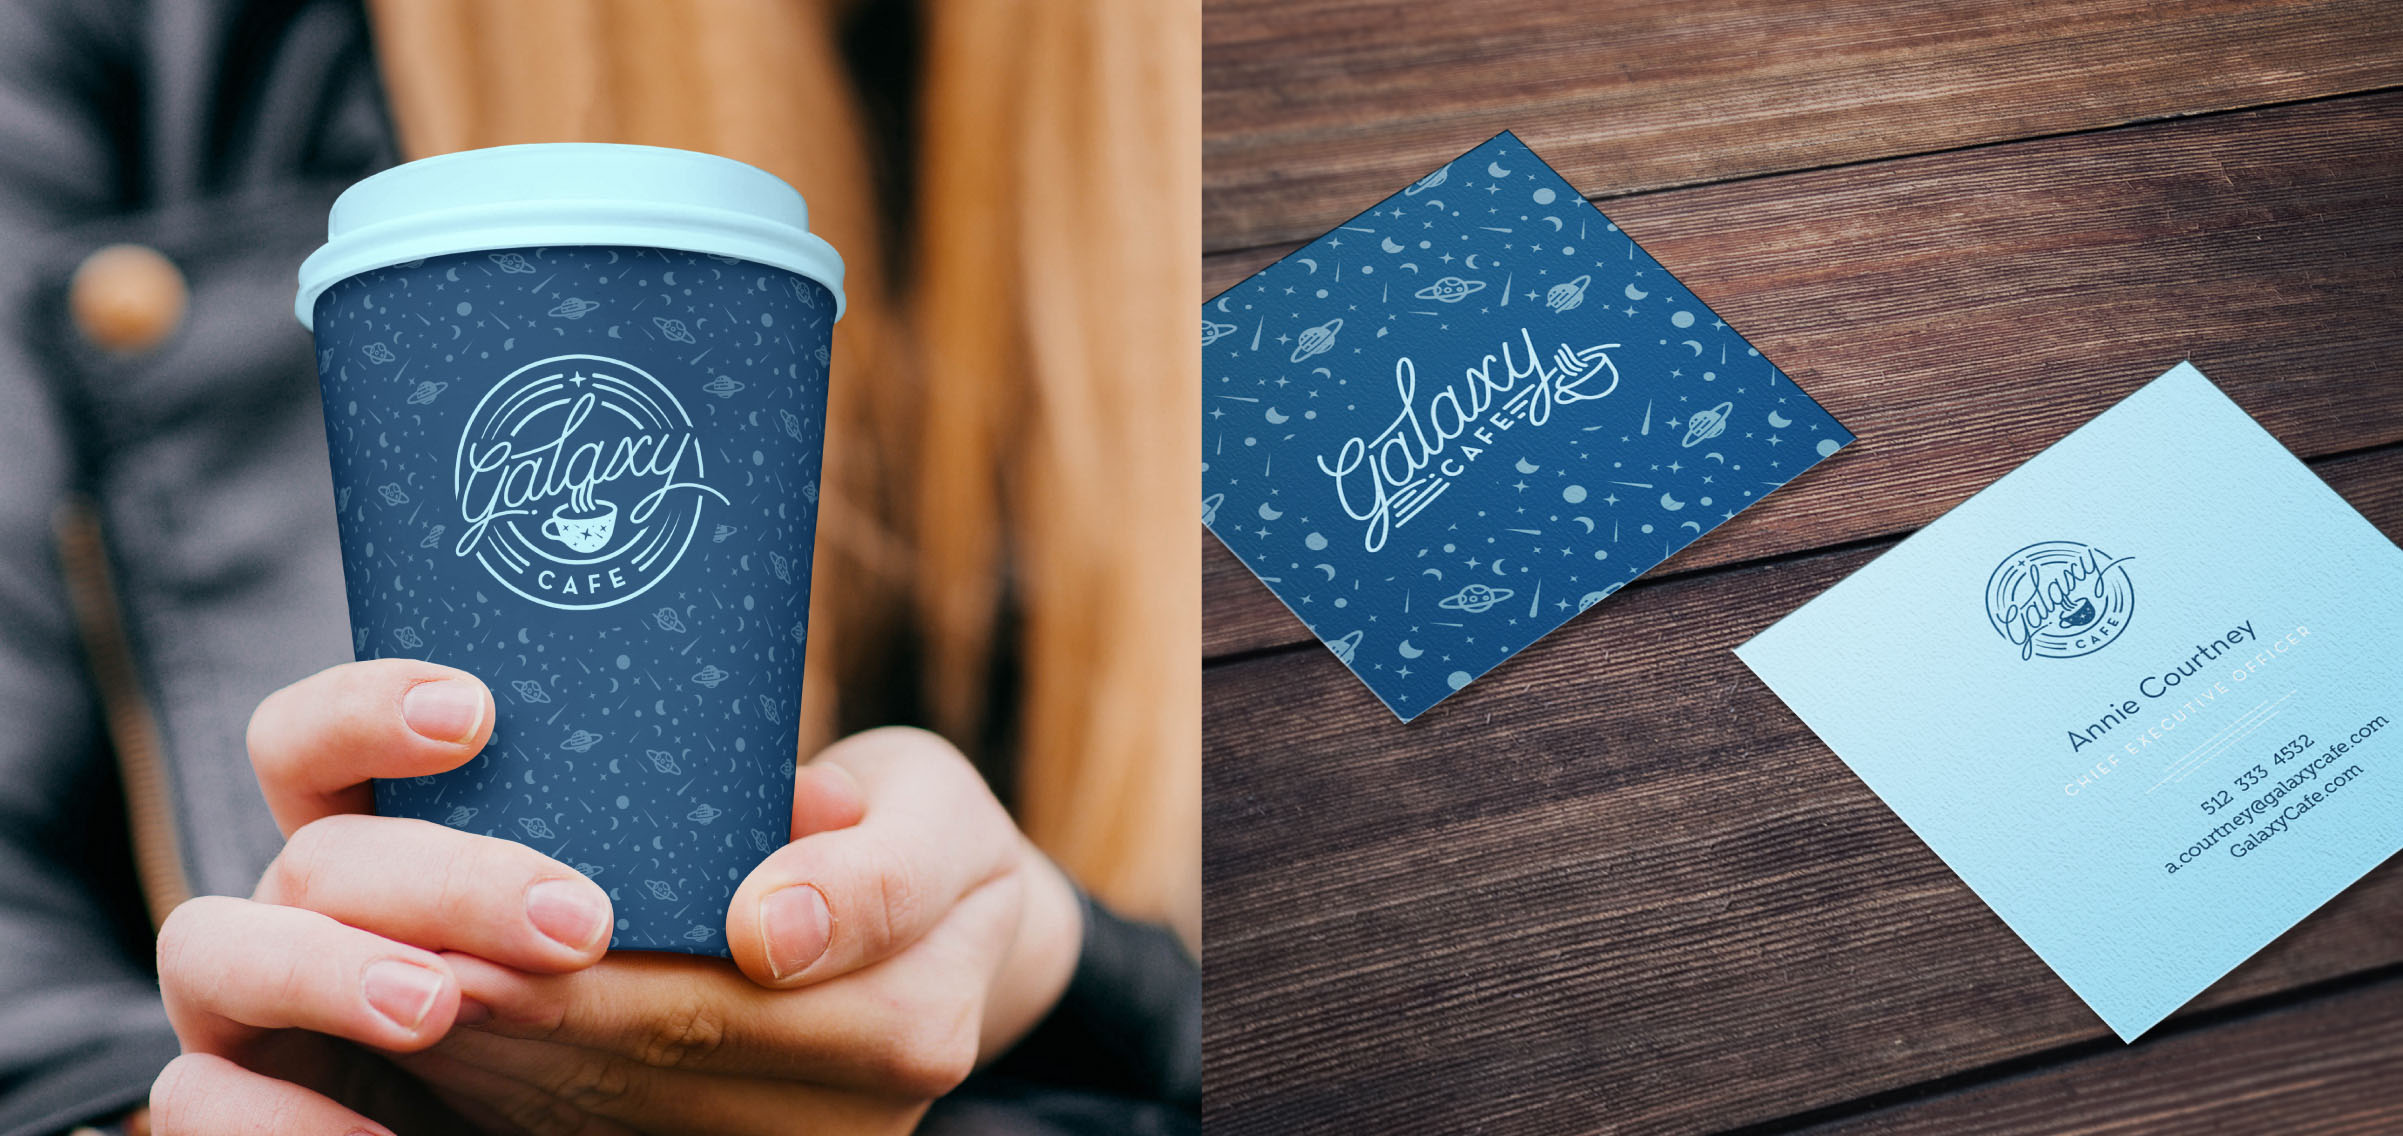 Galaxy Cafe Coffee Cup and Business Card design mockups